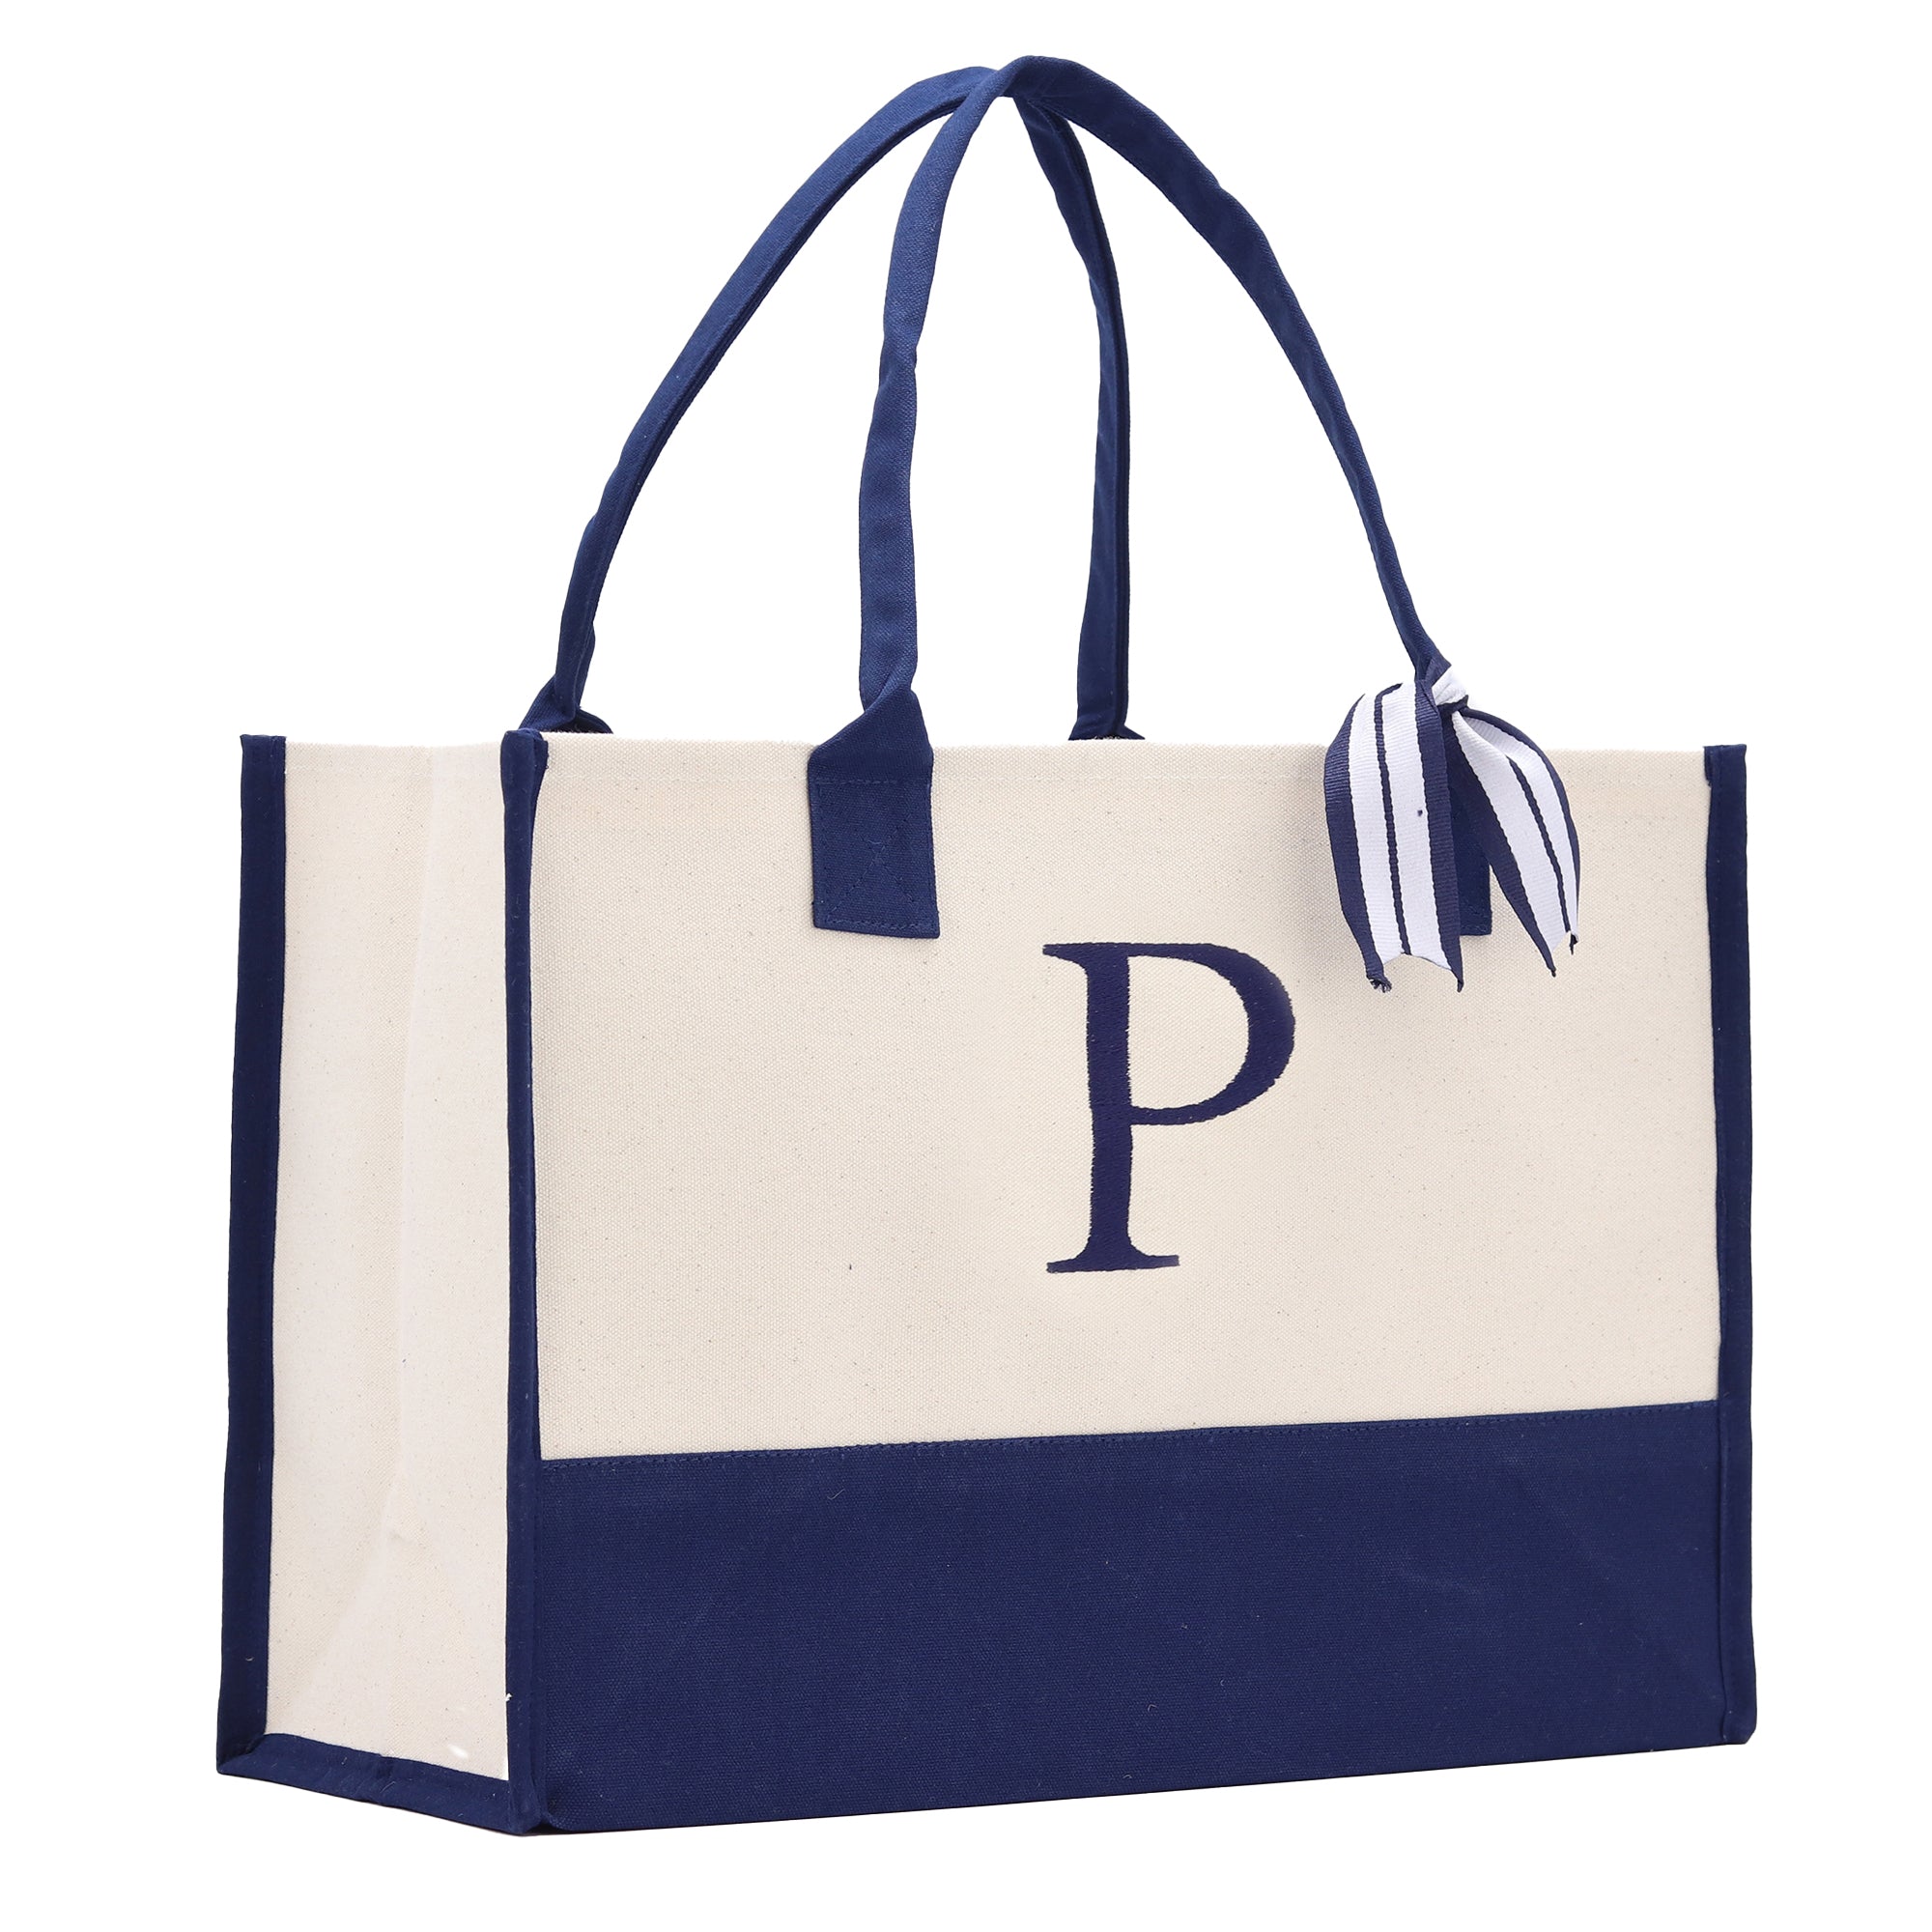 Monogram Tote Bag with 100% Cotton Canvas and a Chic Personalized Monogram Navy Blue Vanessa Rosella Block P 